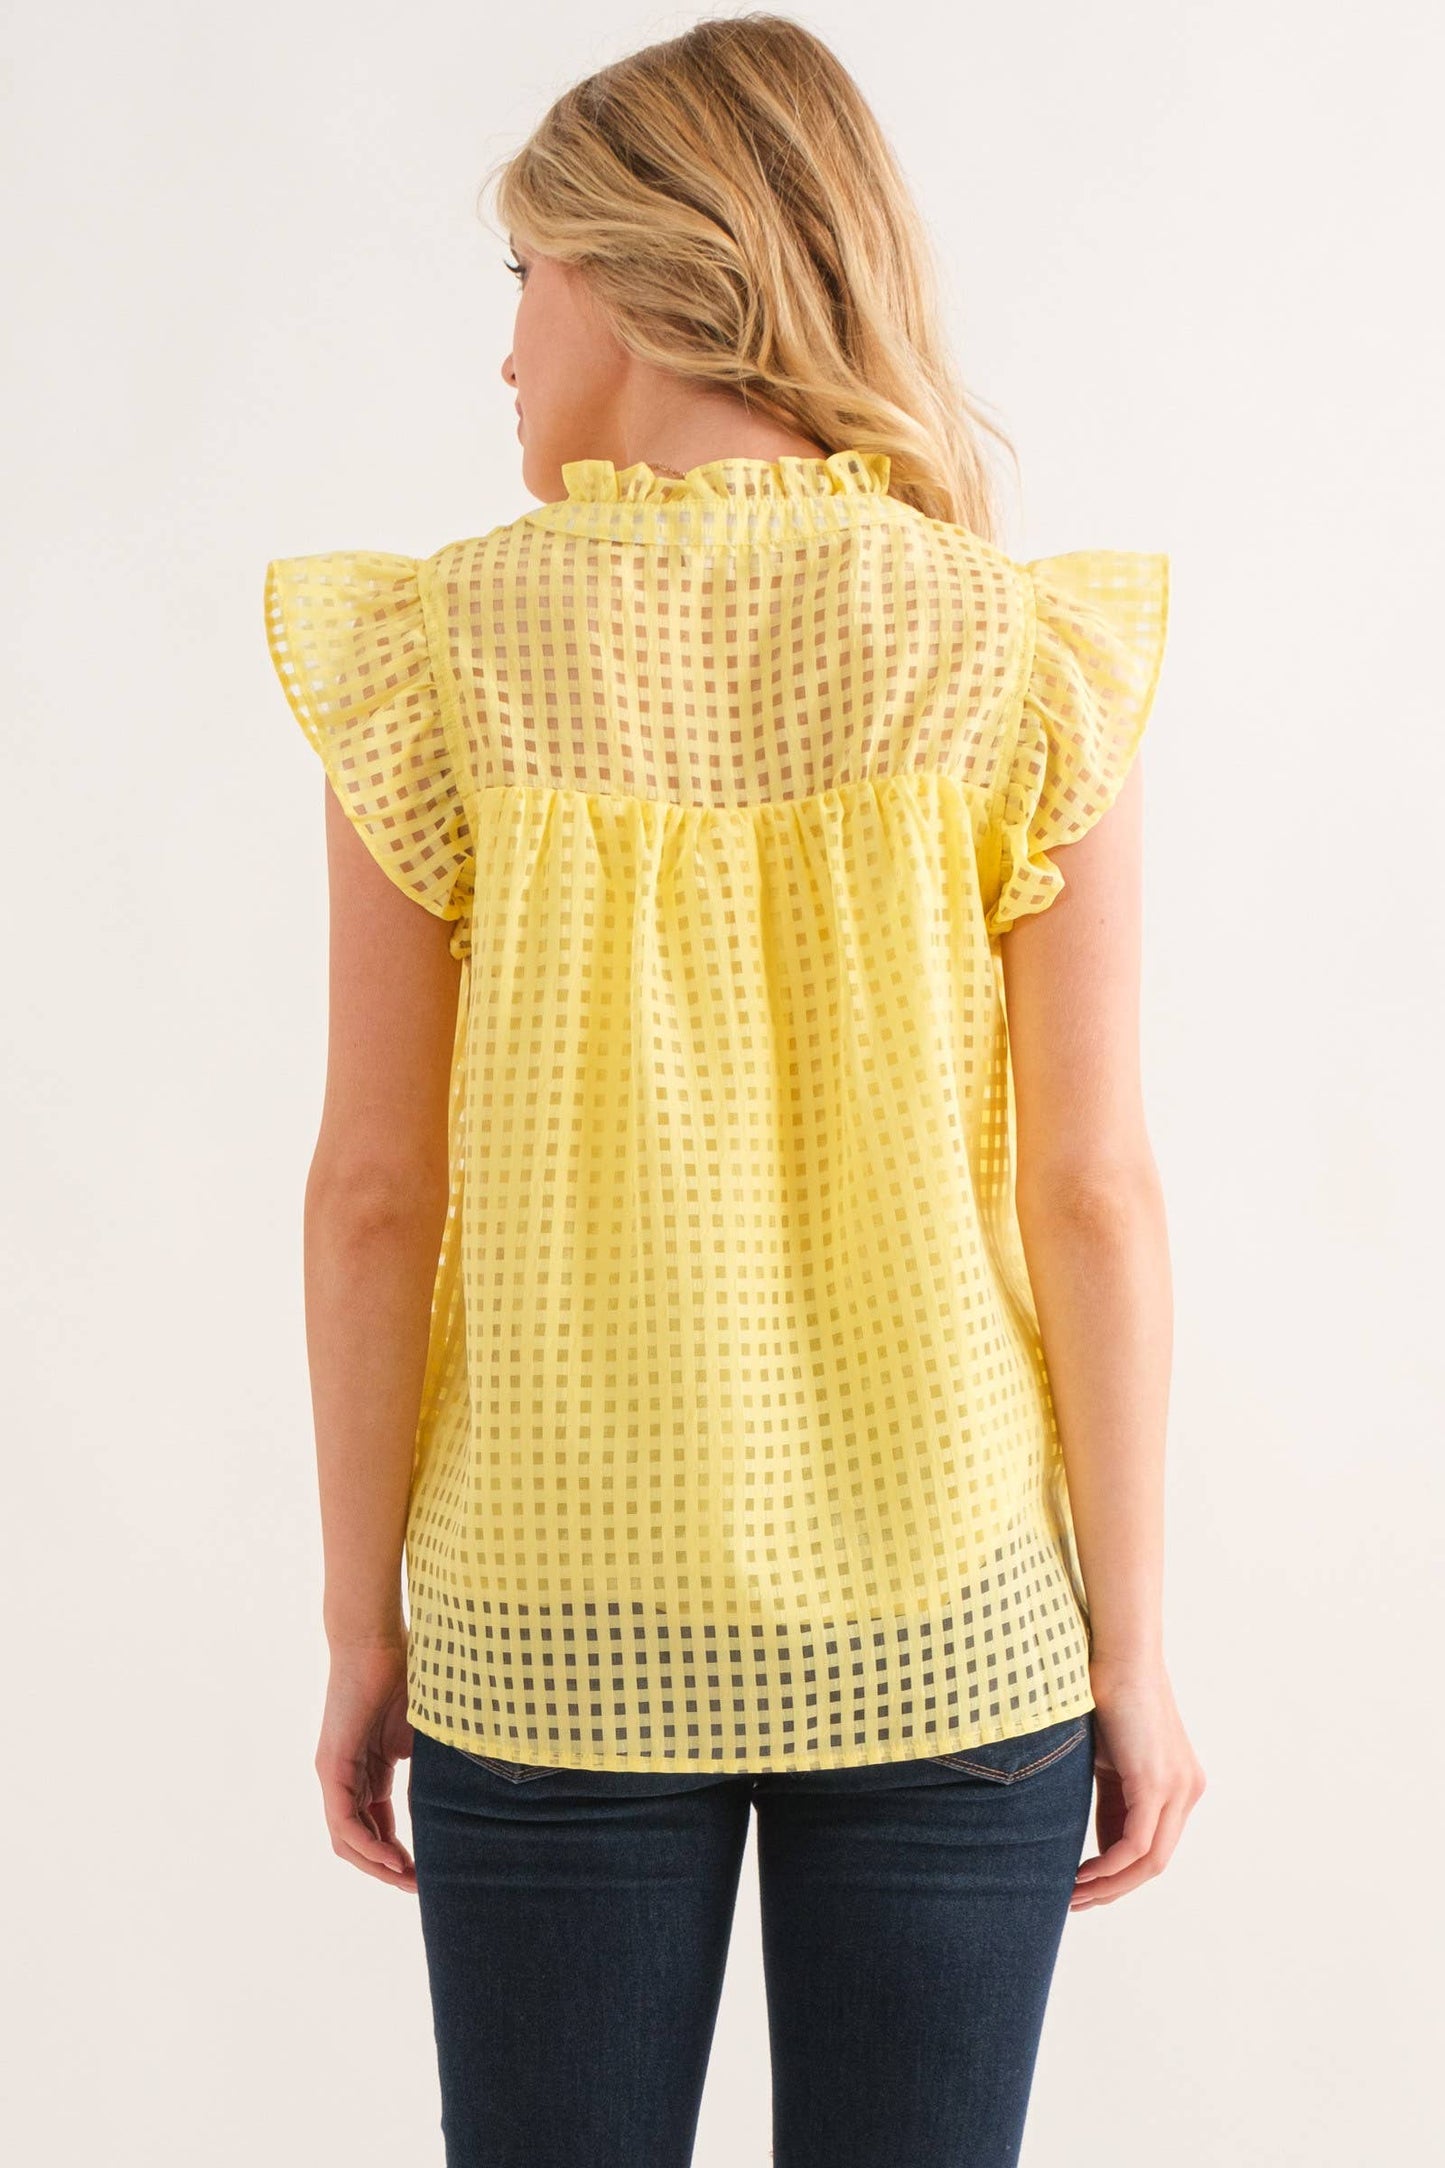 Plus Yellow Sheer and Gridded Baby Doll Ruffled Top